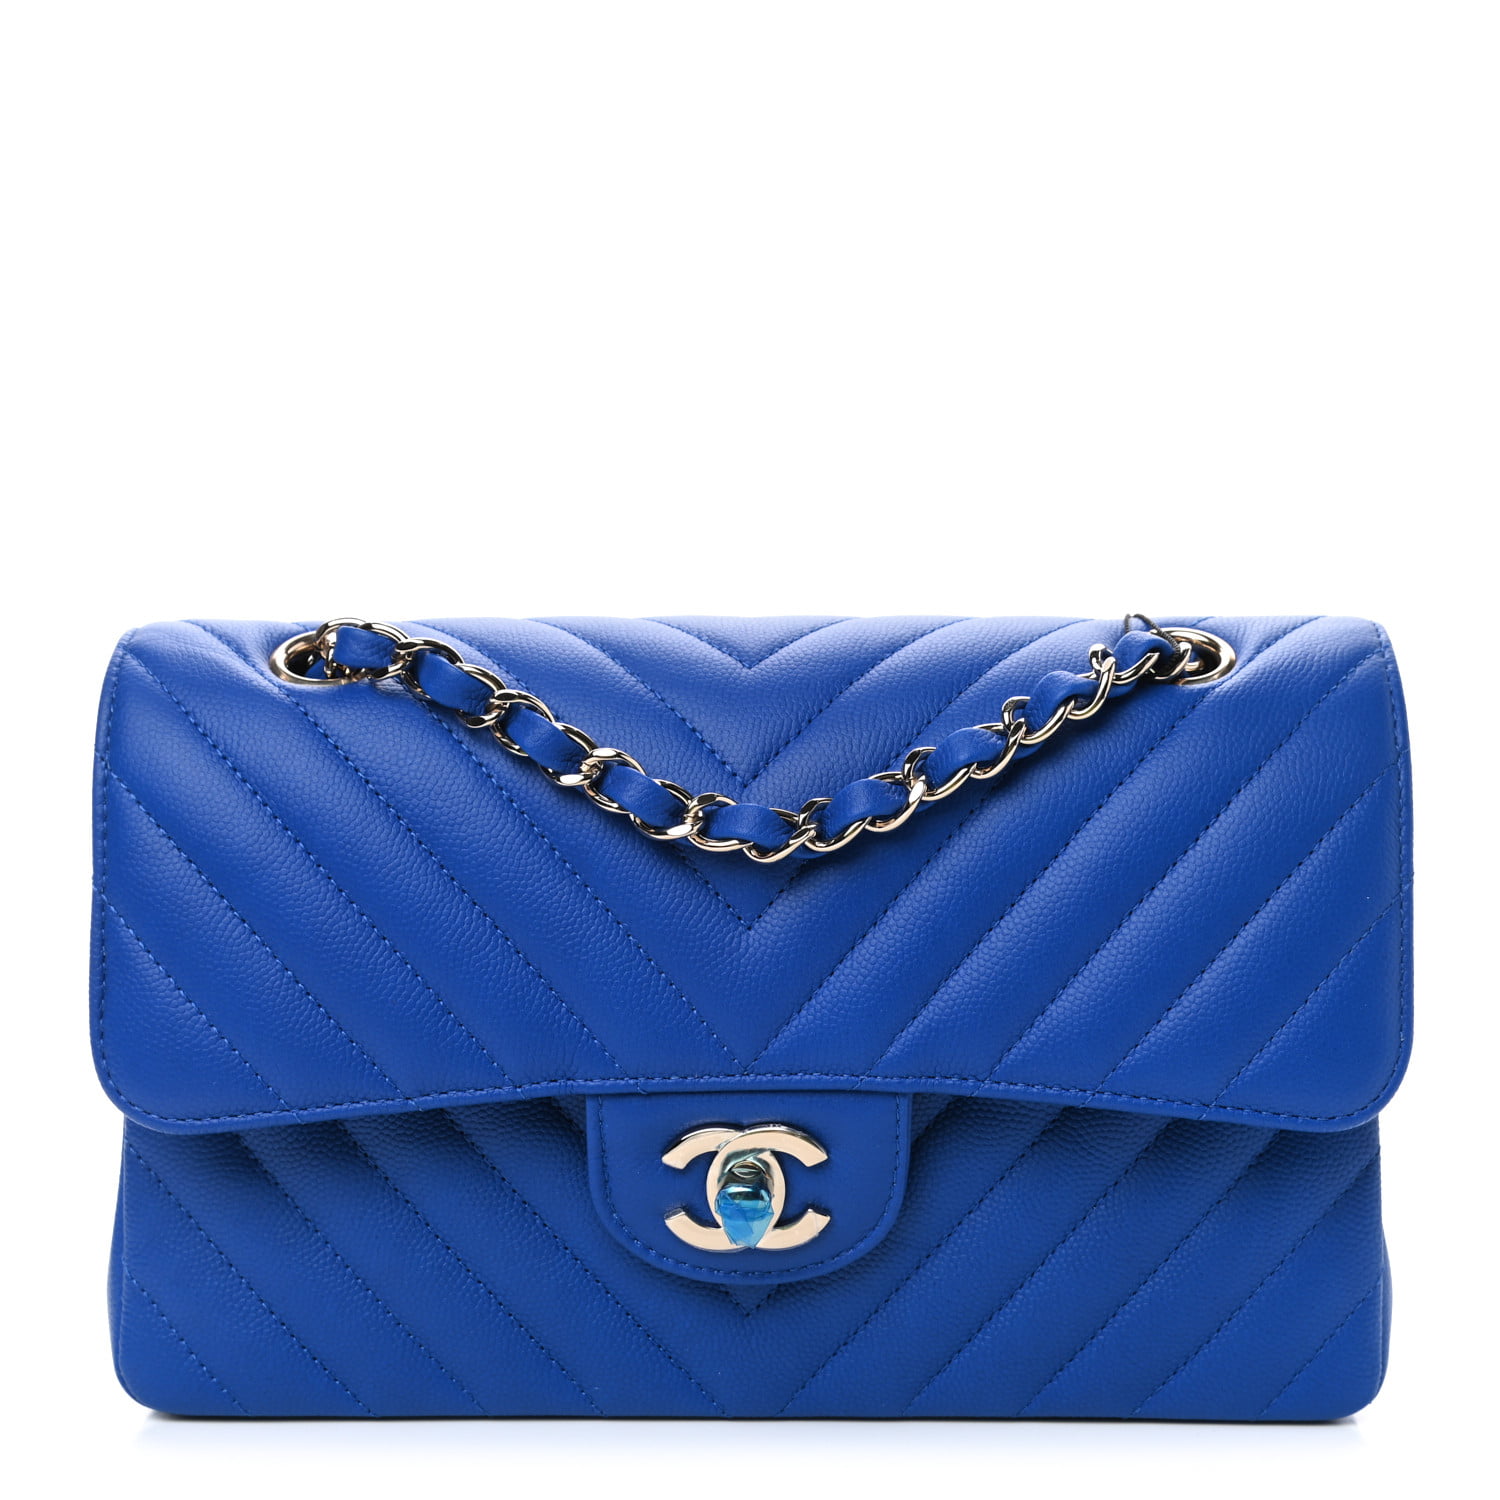 How to Score a Chanel Bag Before the Price Increase - PurseBop